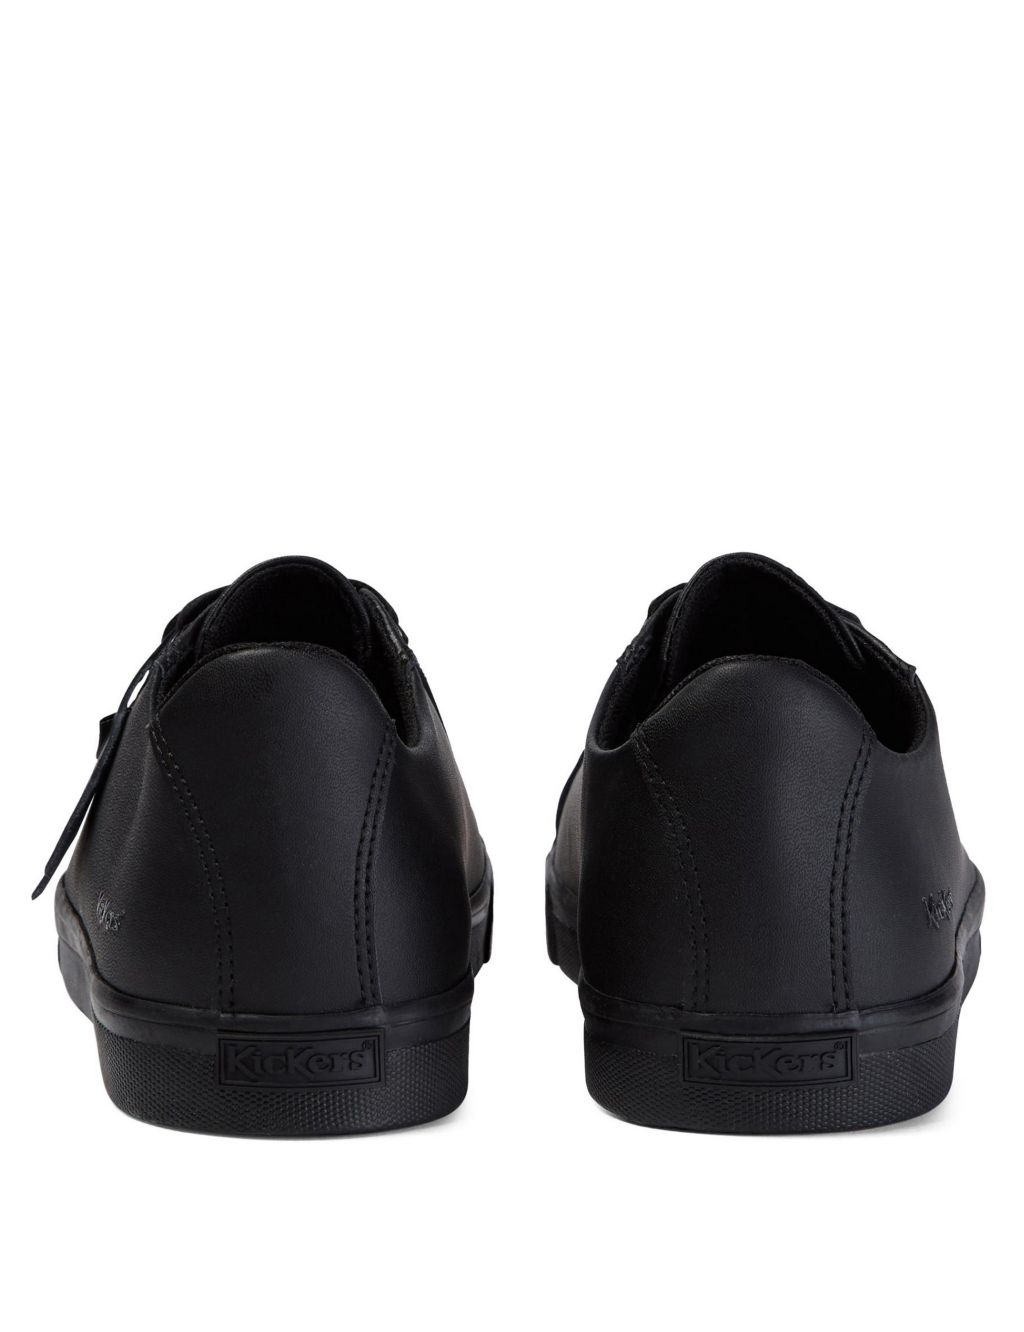 Kids' Leather Lace School Shoes image 3